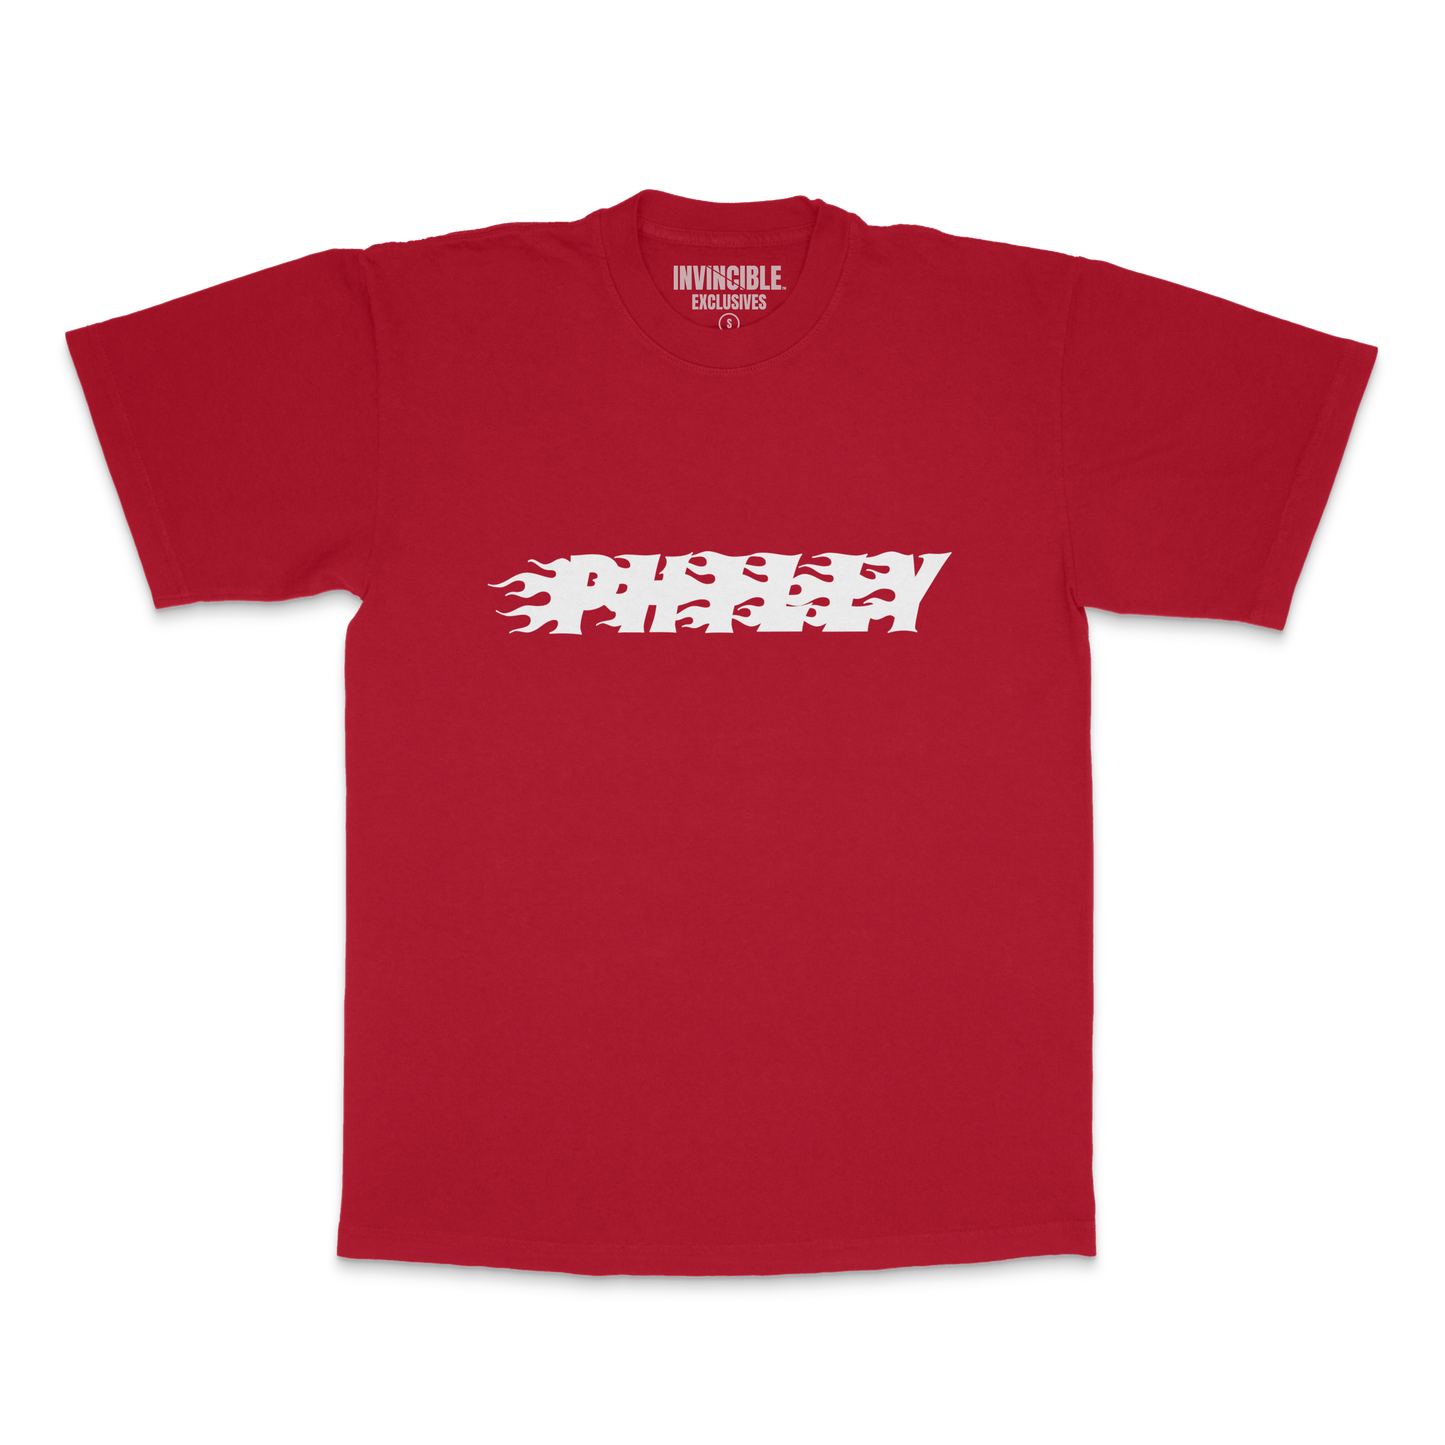 Invincible Exclusives Philly T-Shirt - Red